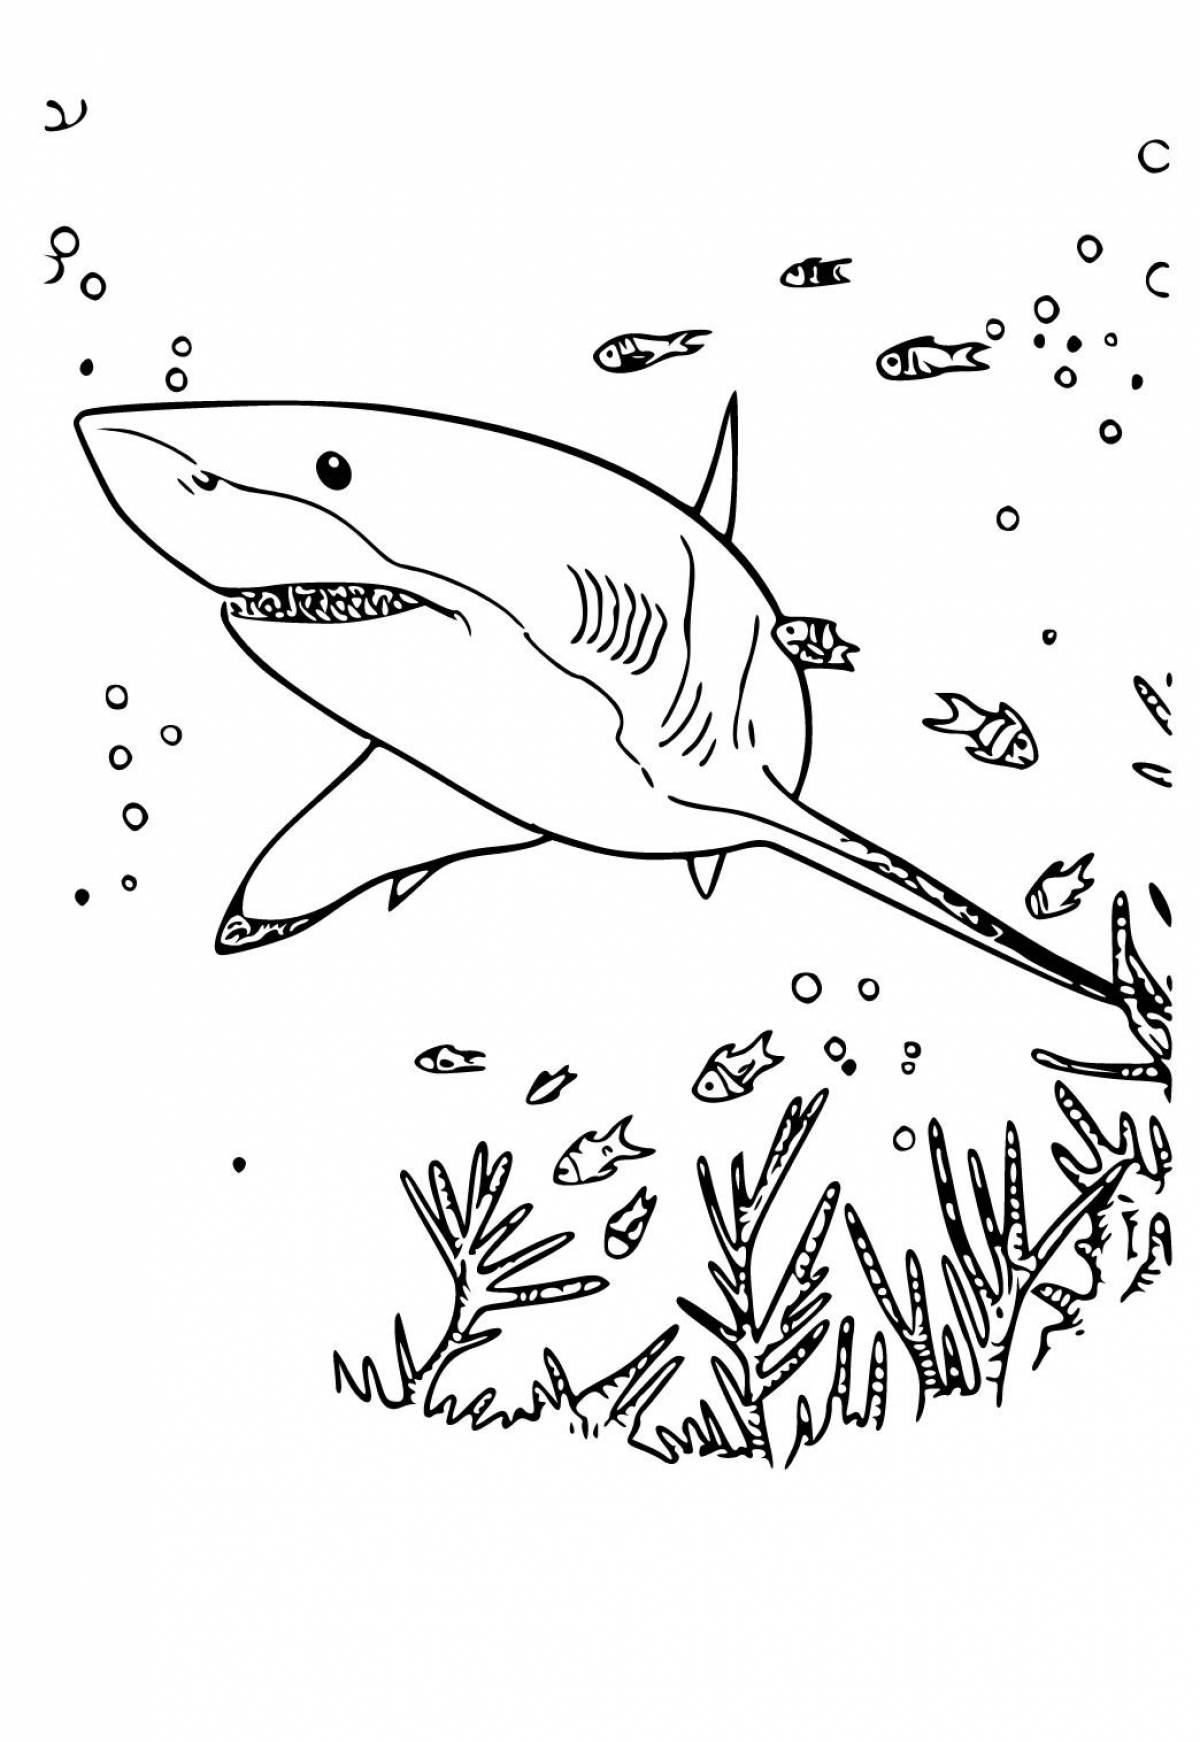 Attractive shark coloring book for kids